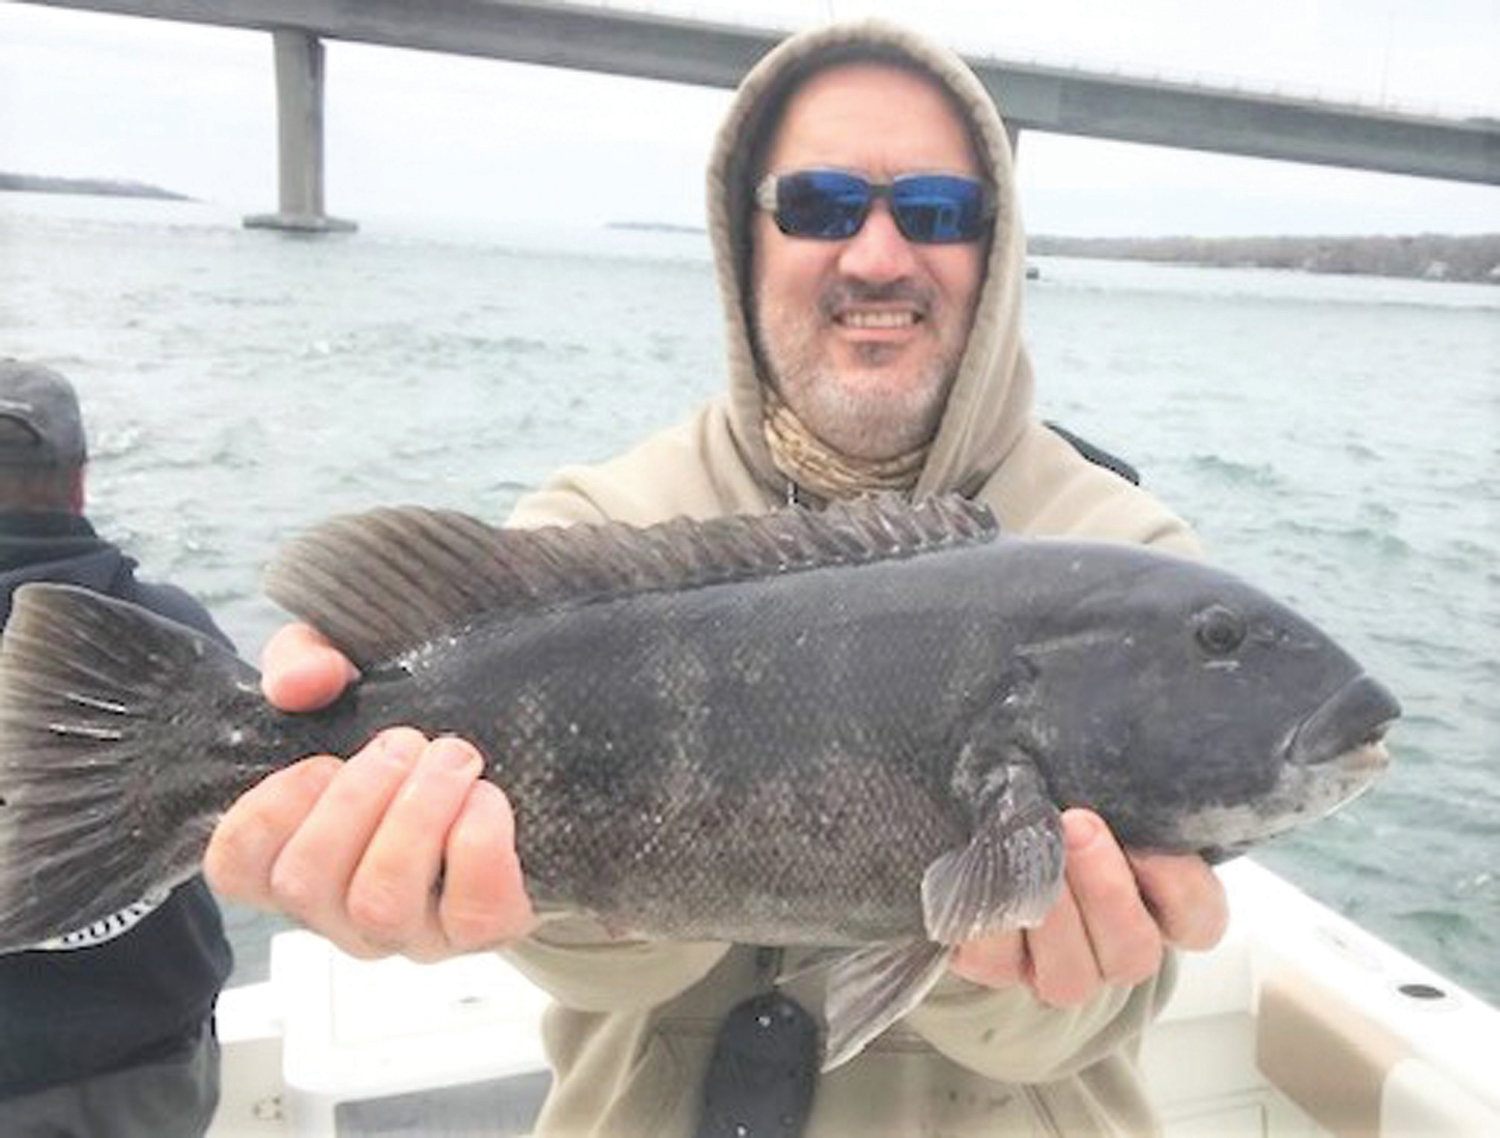 Tautog bite strong: The tautog bite remains strong in the Bay and along the coastal shore. Derek Kolodziejczak with a tautog caught this week near the Jamestown Bridge.